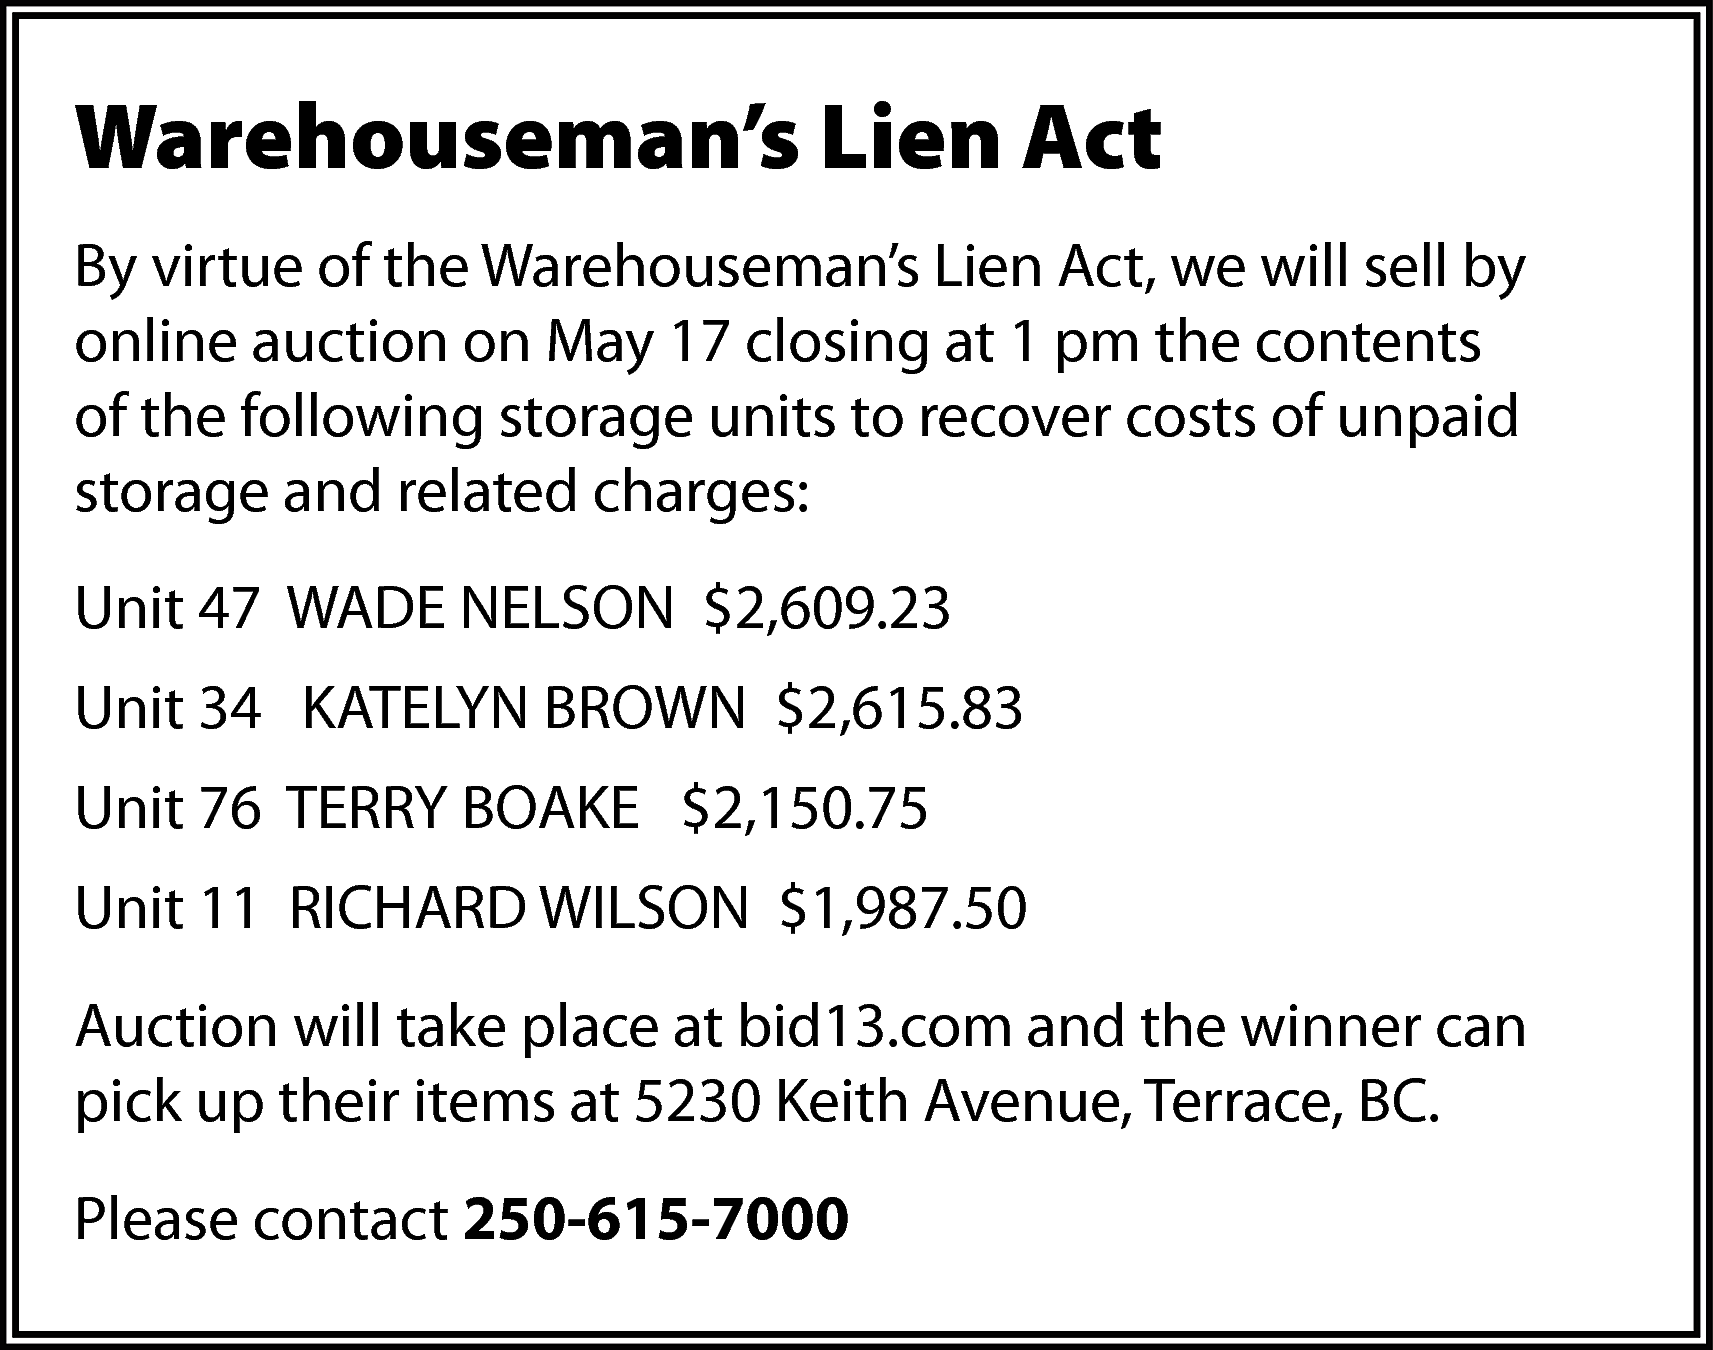 Warehouseman’s Lien Act <br>By virtue  Warehouseman’s Lien Act  By virtue of the Warehouseman’s Lien Act, we will sell by  online auction on May 17 closing at 1 pm the contents  of the following storage units to recover costs of unpaid  storage and related charges:  Unit 47 WADE NELSON $2,609.23  Unit 34 KATELYN BROWN $2,615.83  Unit 76 TERRY BOAKE $2,150.75  Unit 11 RICHARD WILSON $1,987.50  Auction will take place at bid13.com and the winner can  pick up their items at 5230 Keith Avenue, Terrace, BC.  Please contact 250-615-7000    